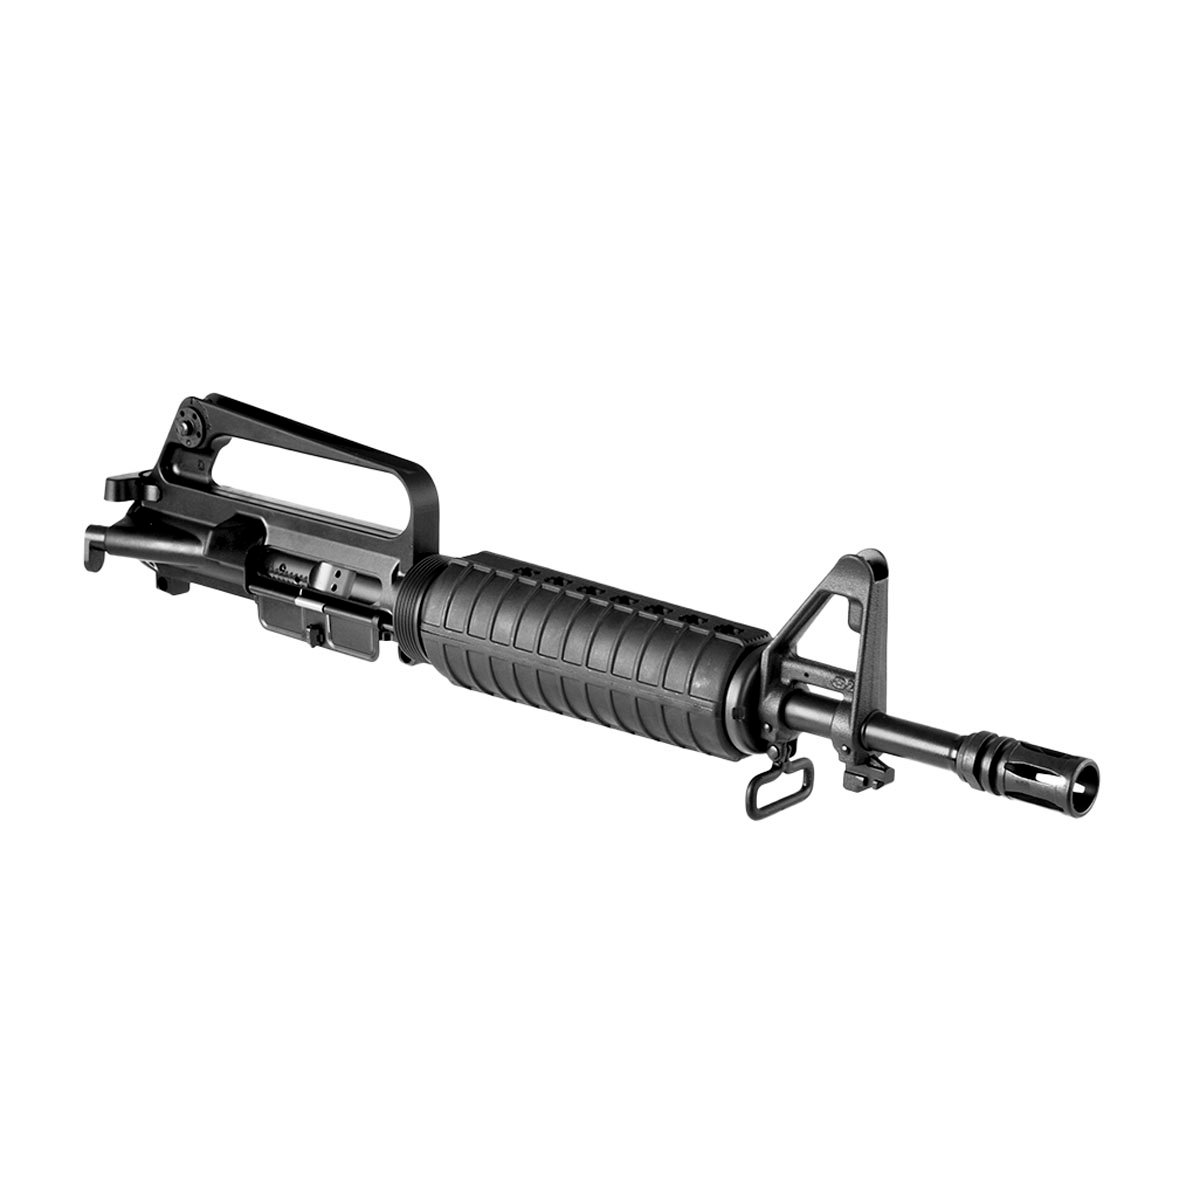 Rifle Receivers & Parts For Sale Up To 85% Off + Coupon | Brownells